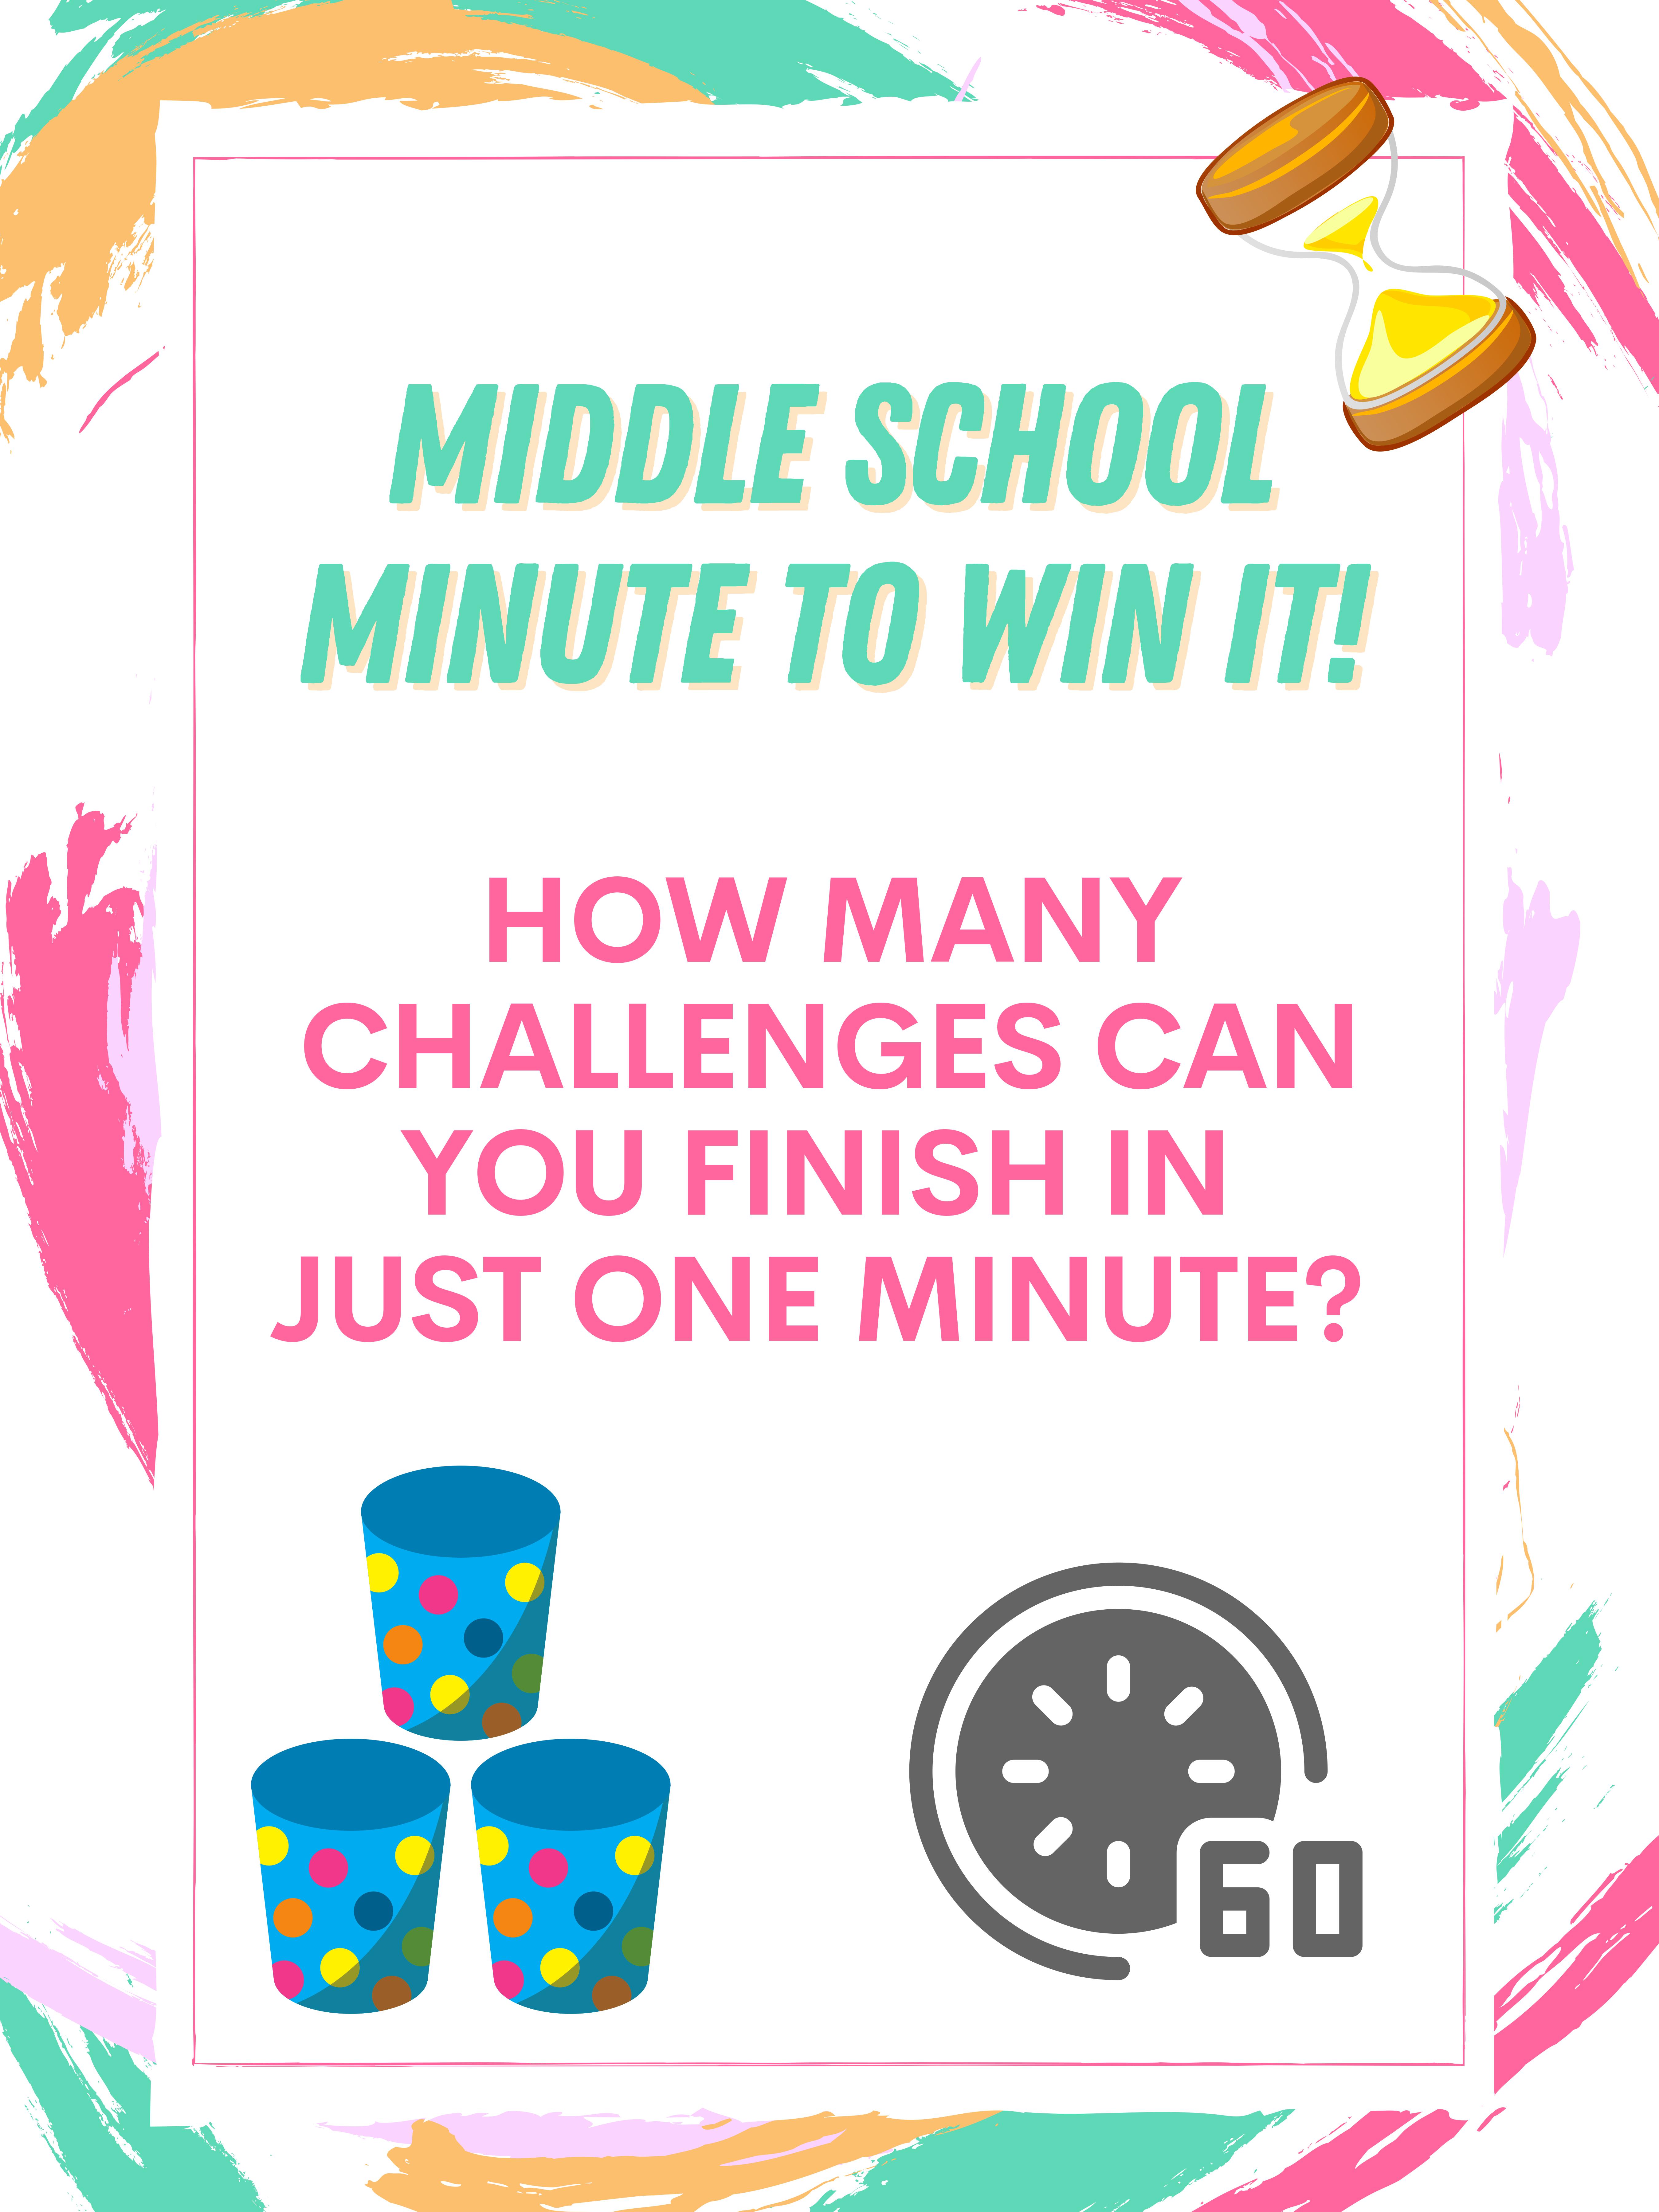 Middle School Minute to Win It! How many challenges can you finish in just one minute?